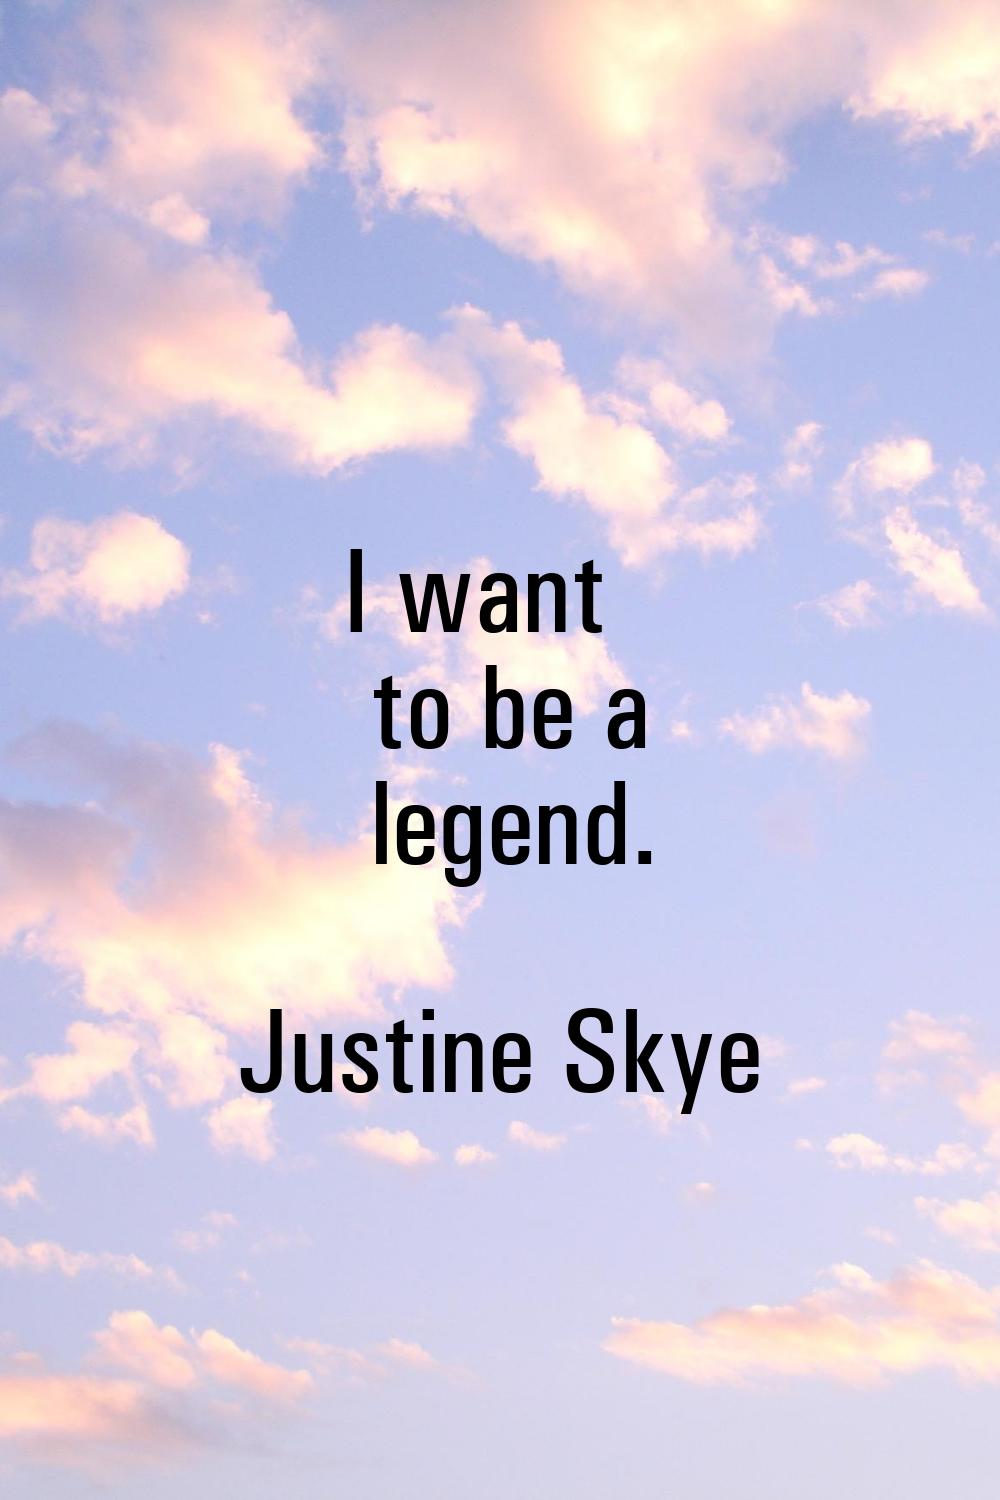 I want to be a legend.